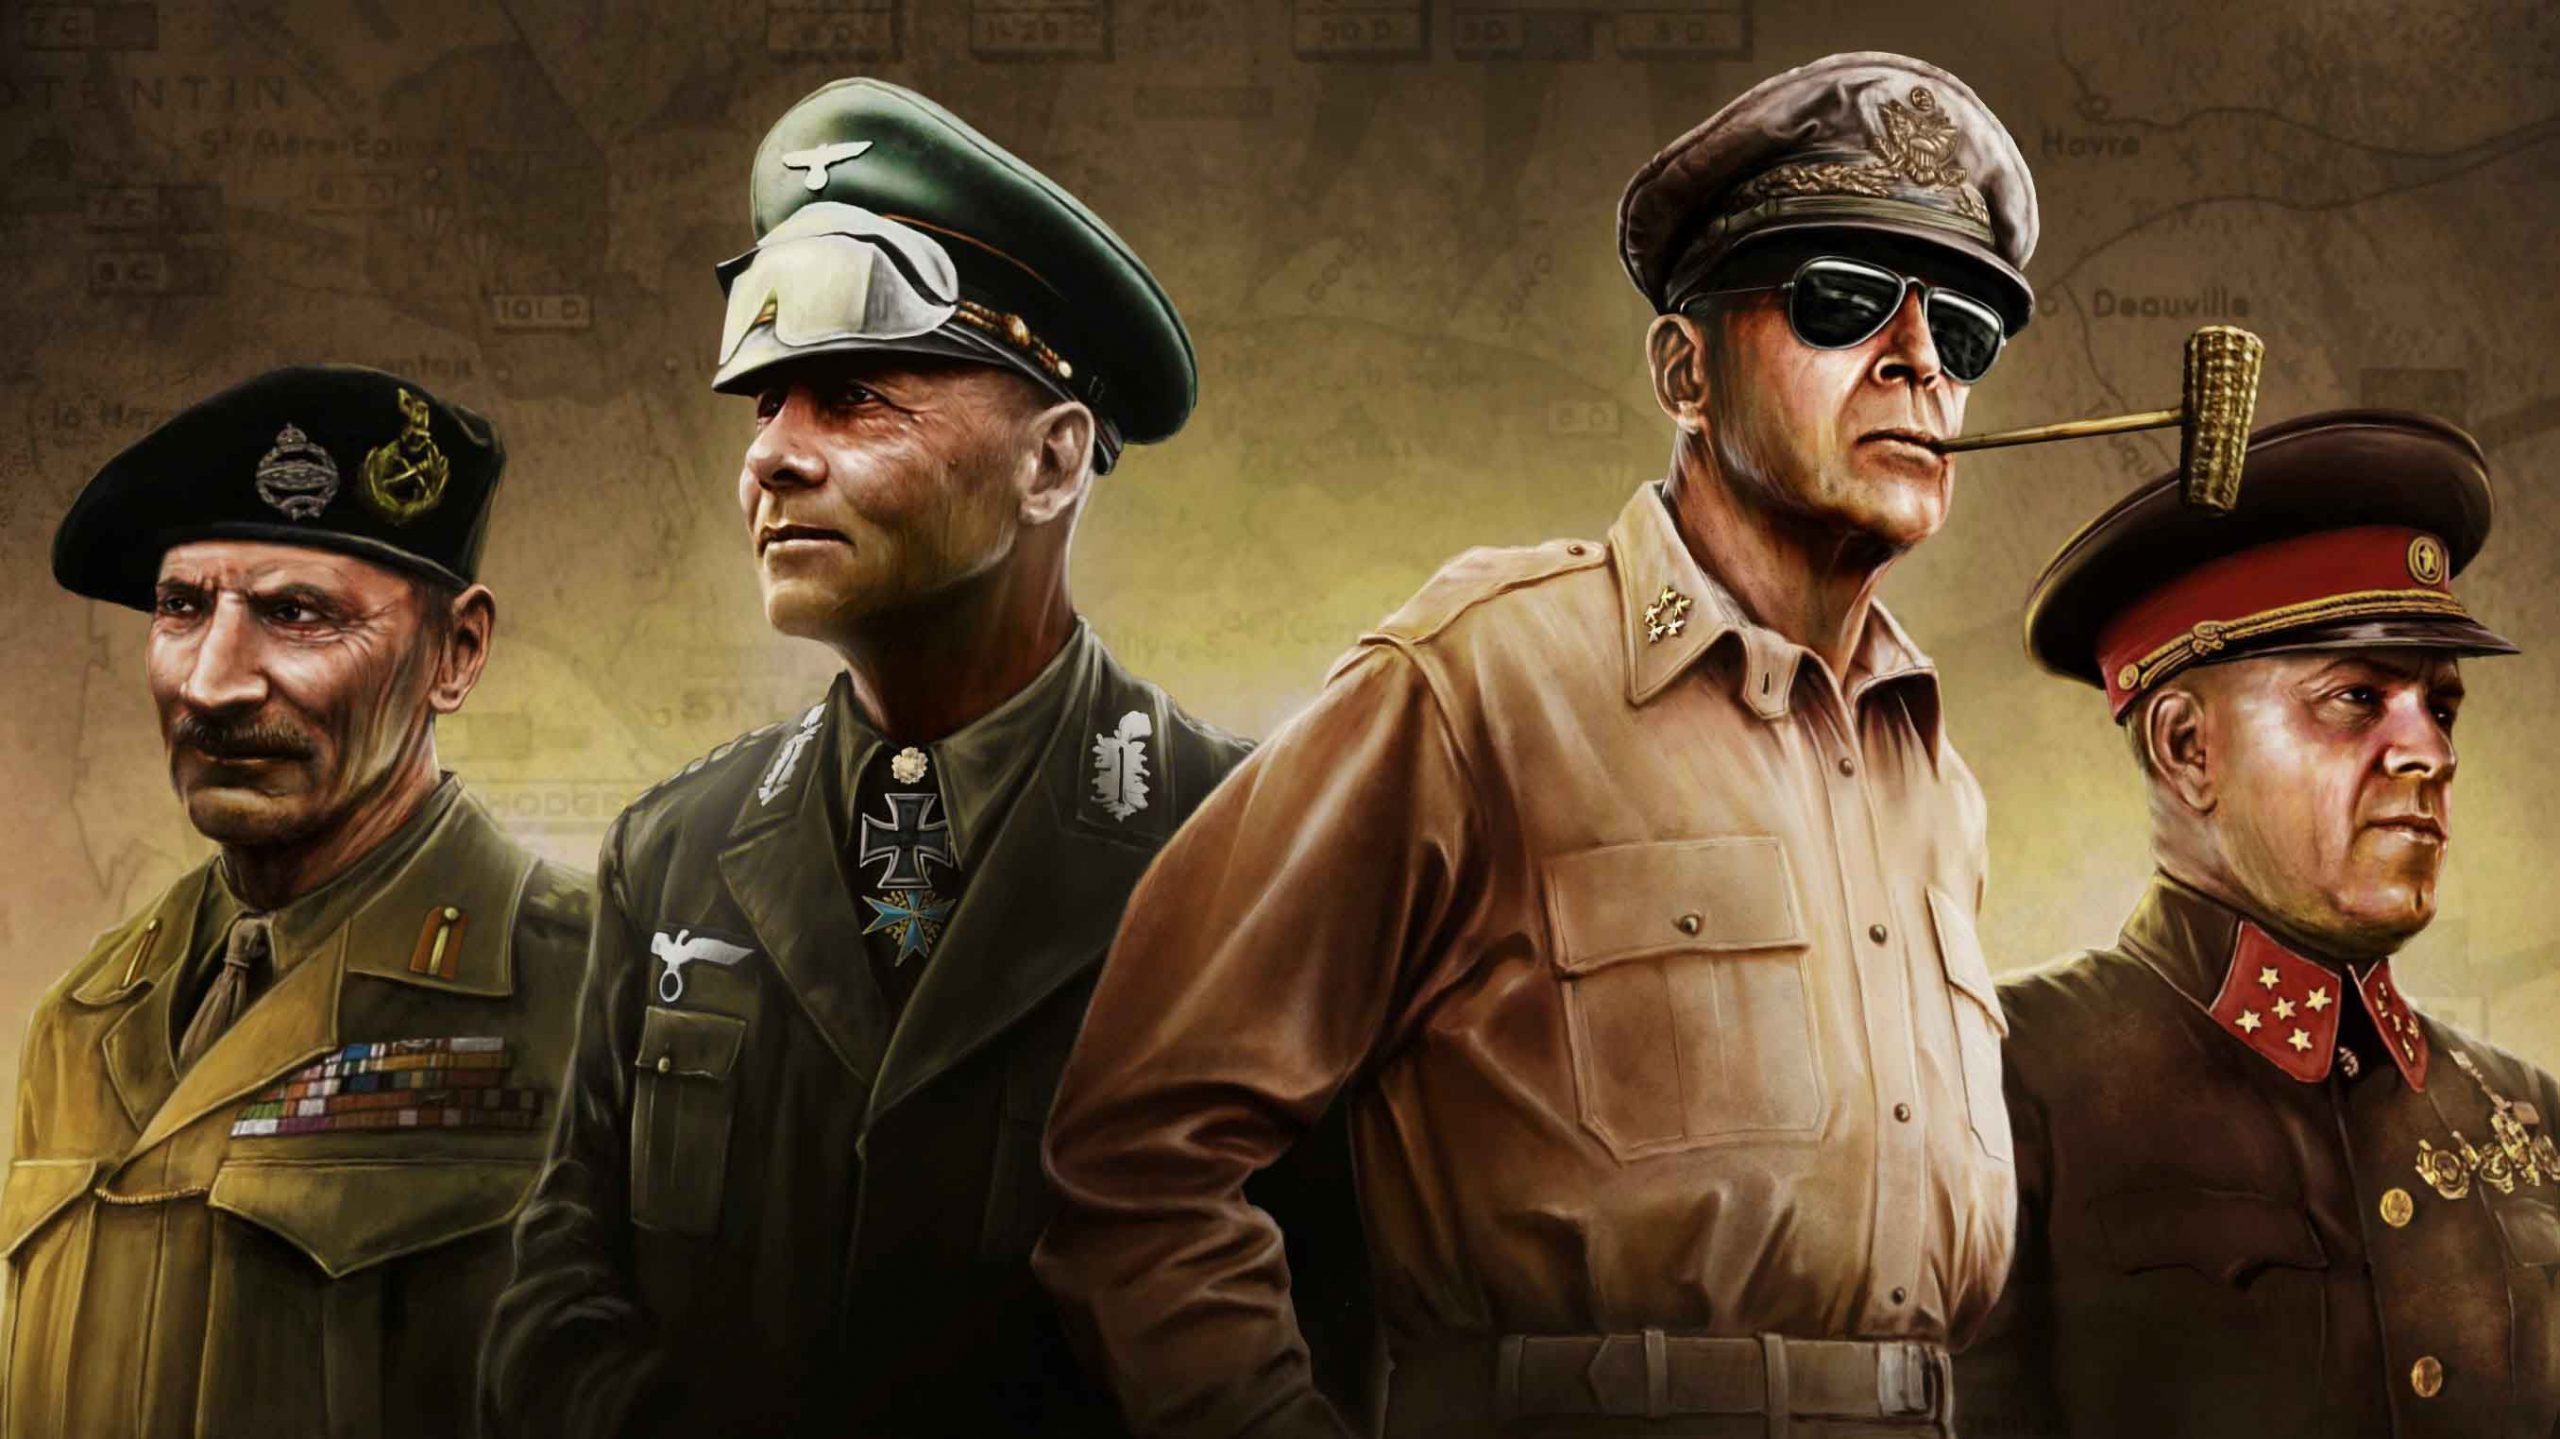 hearts of iron 4 activate dlc from skidrow